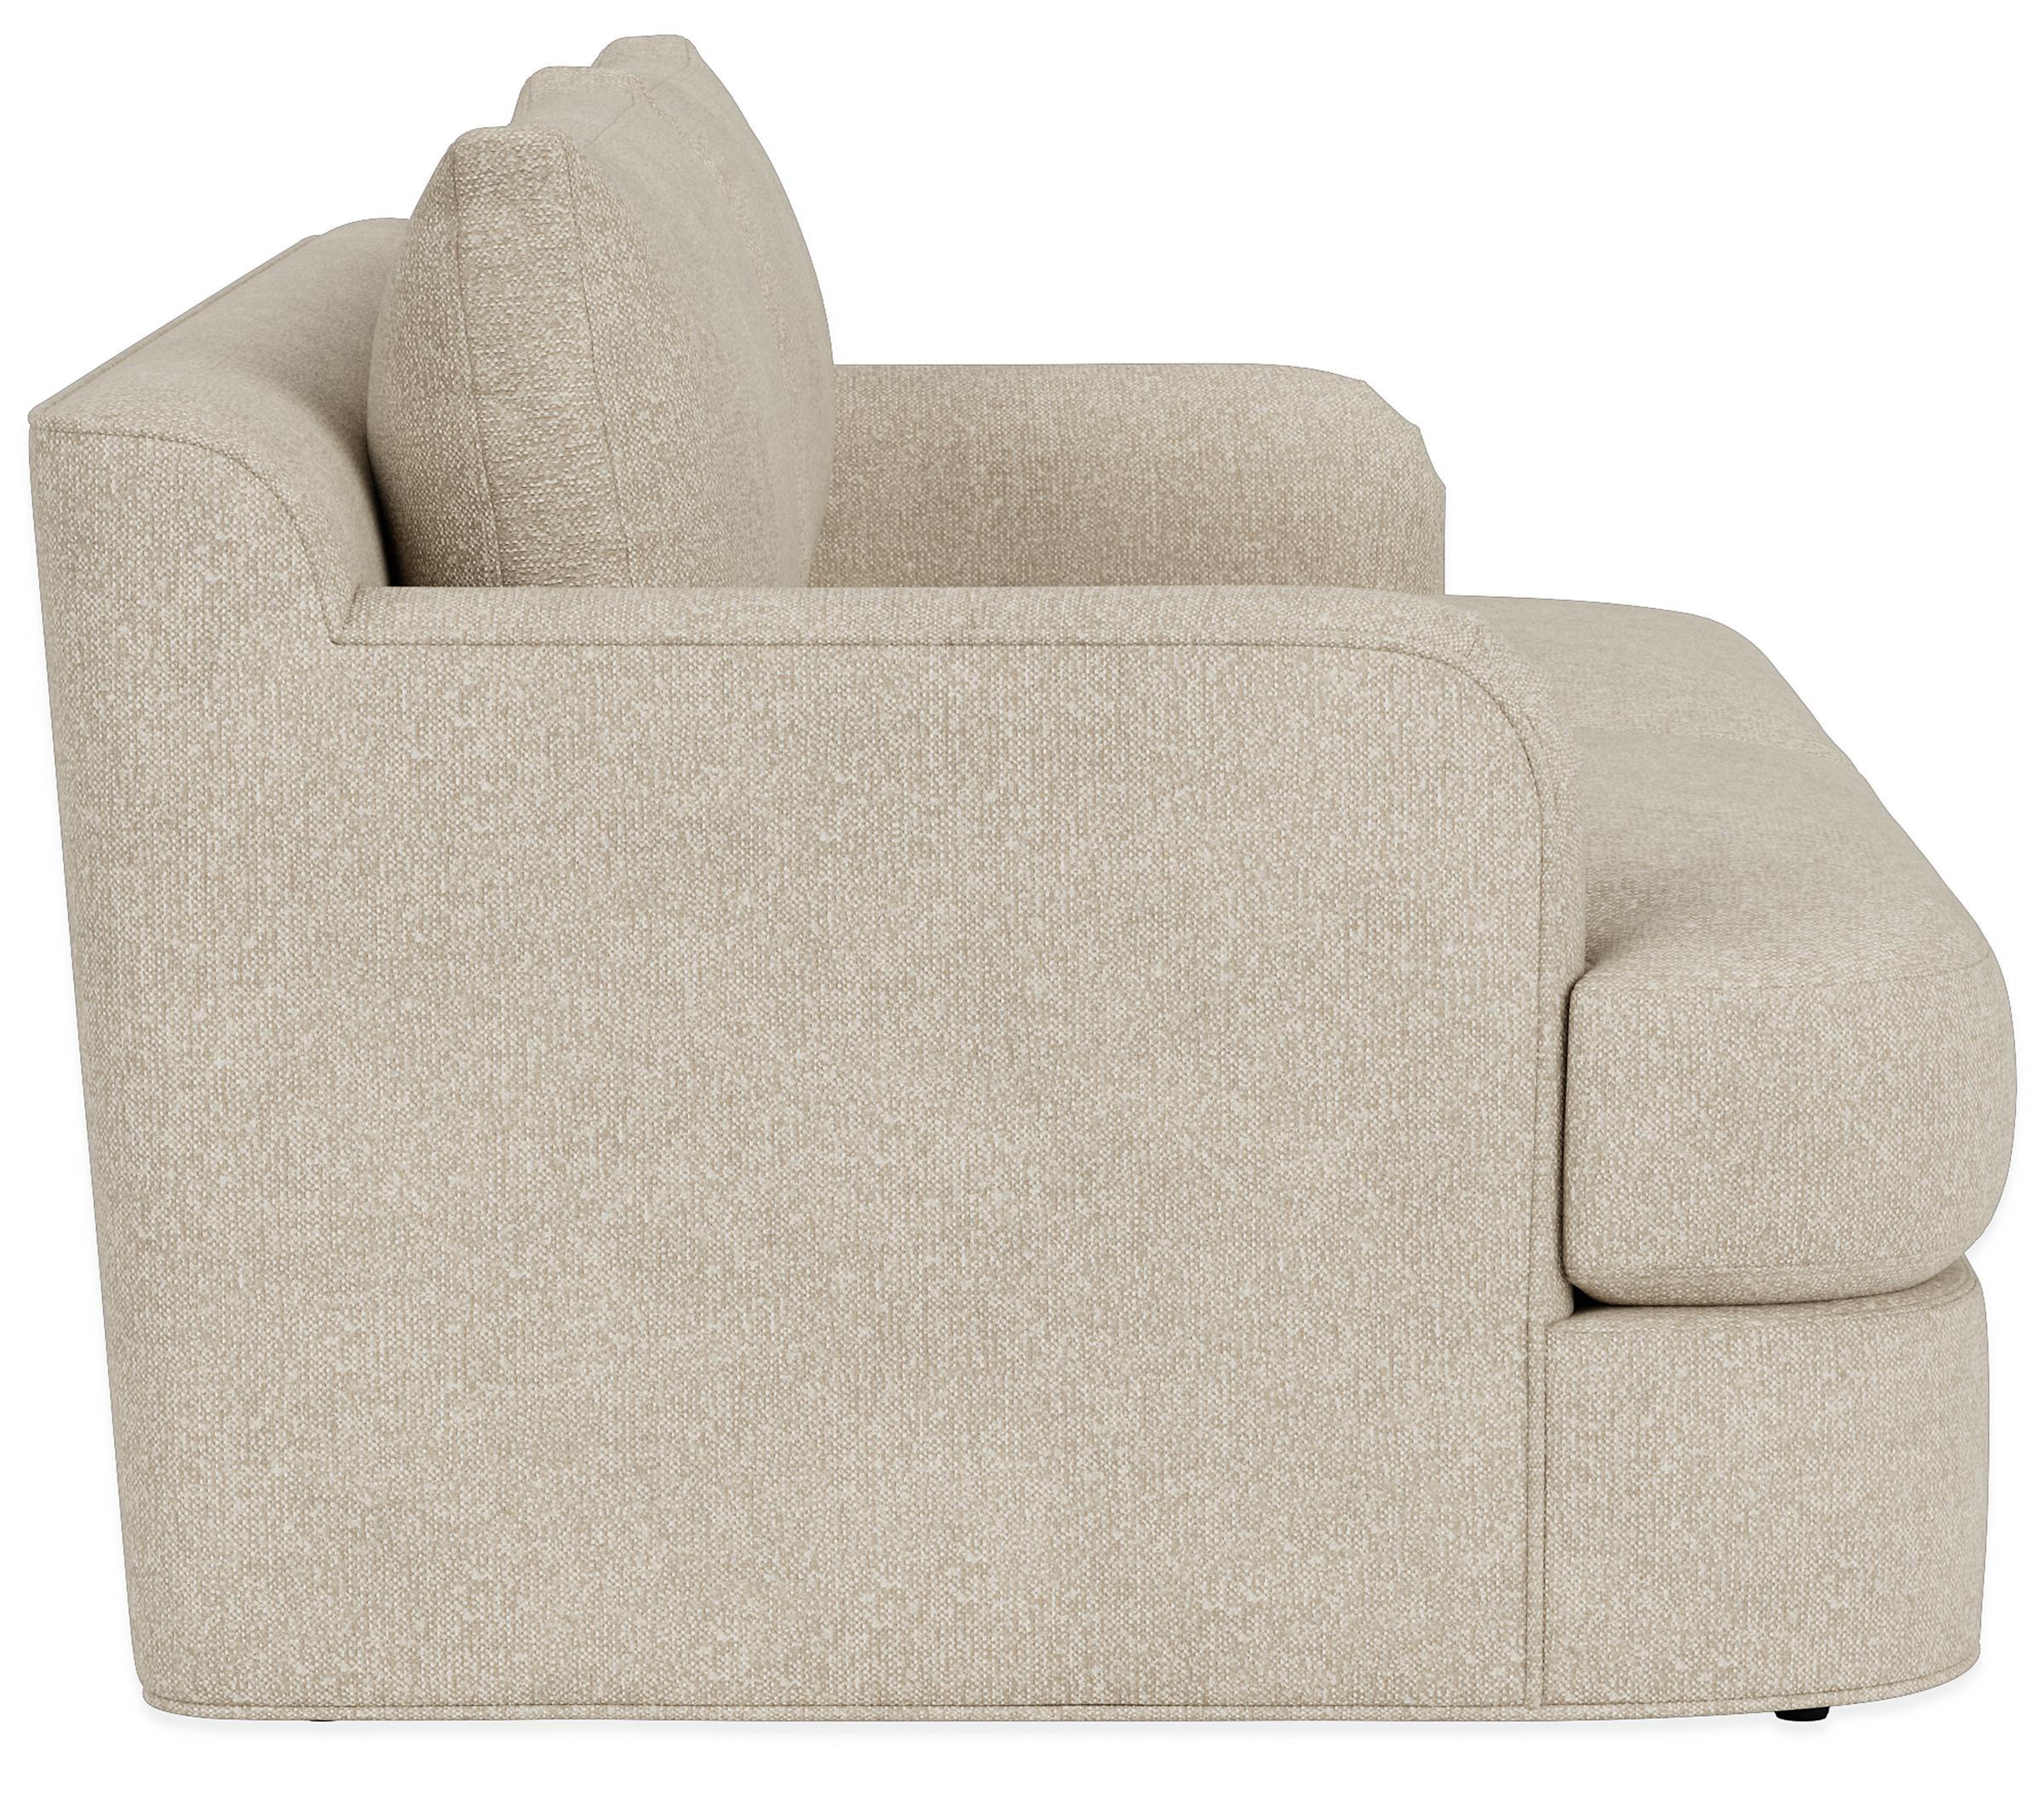 side view of Sonja 81 Sofa in Conley Natural.